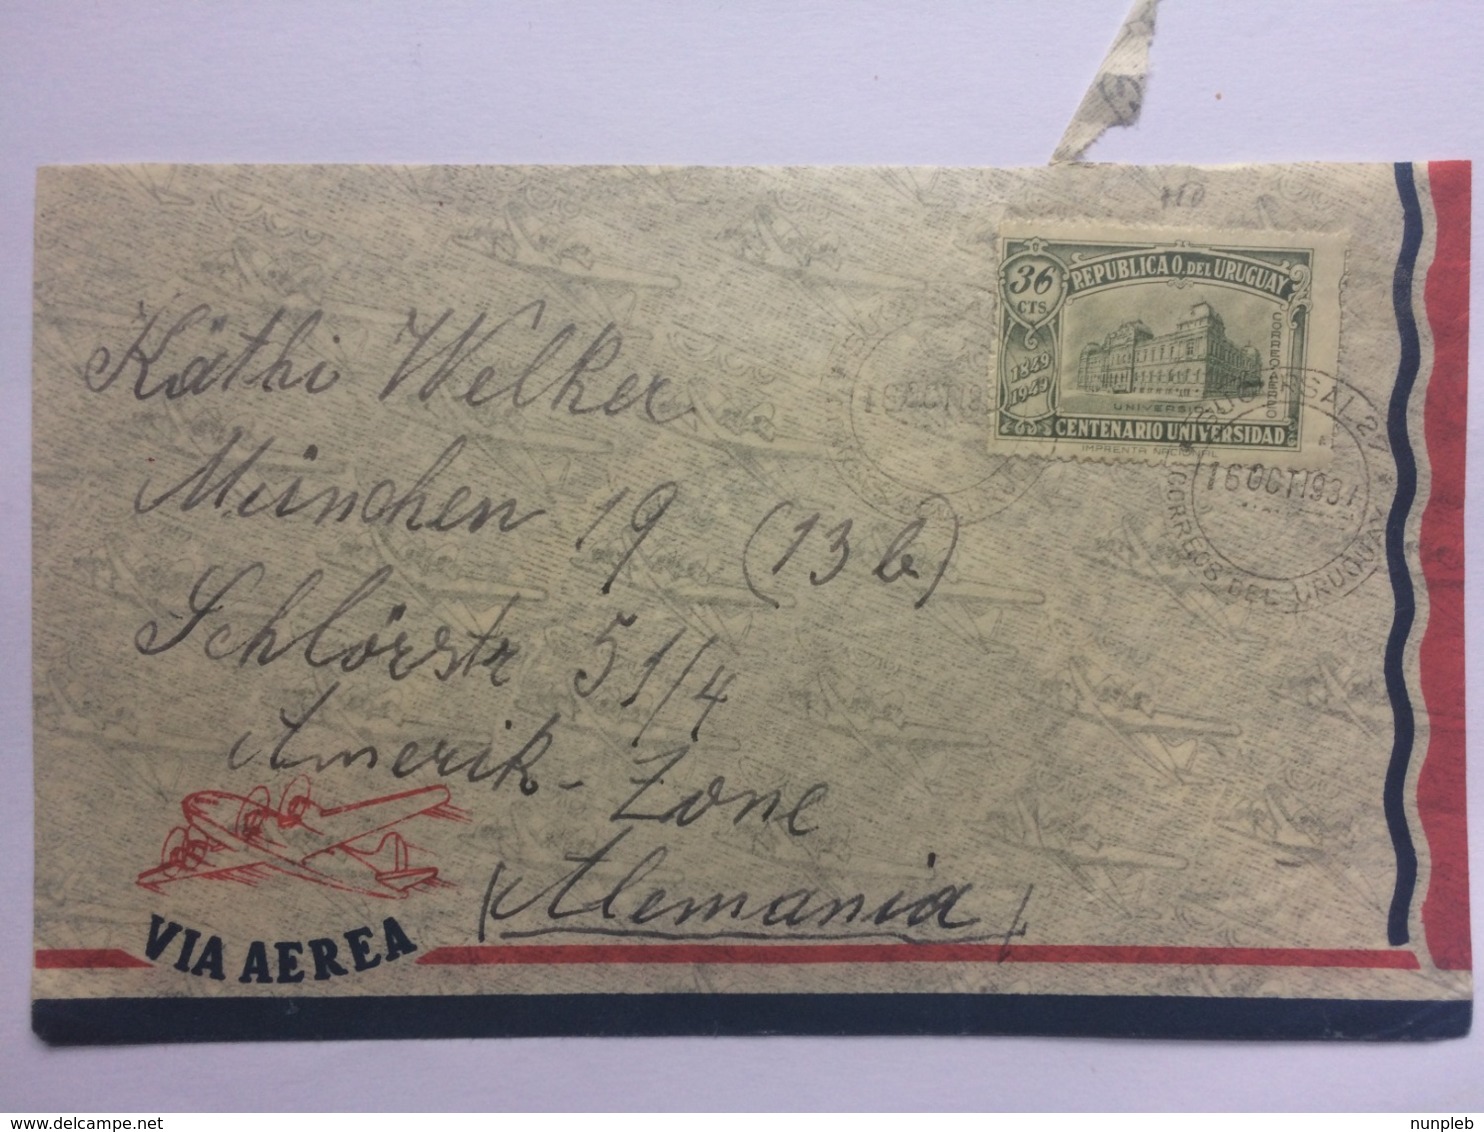 URUGUAY 1937 Air Mail Cover Sucursal To Germany - Uruguay